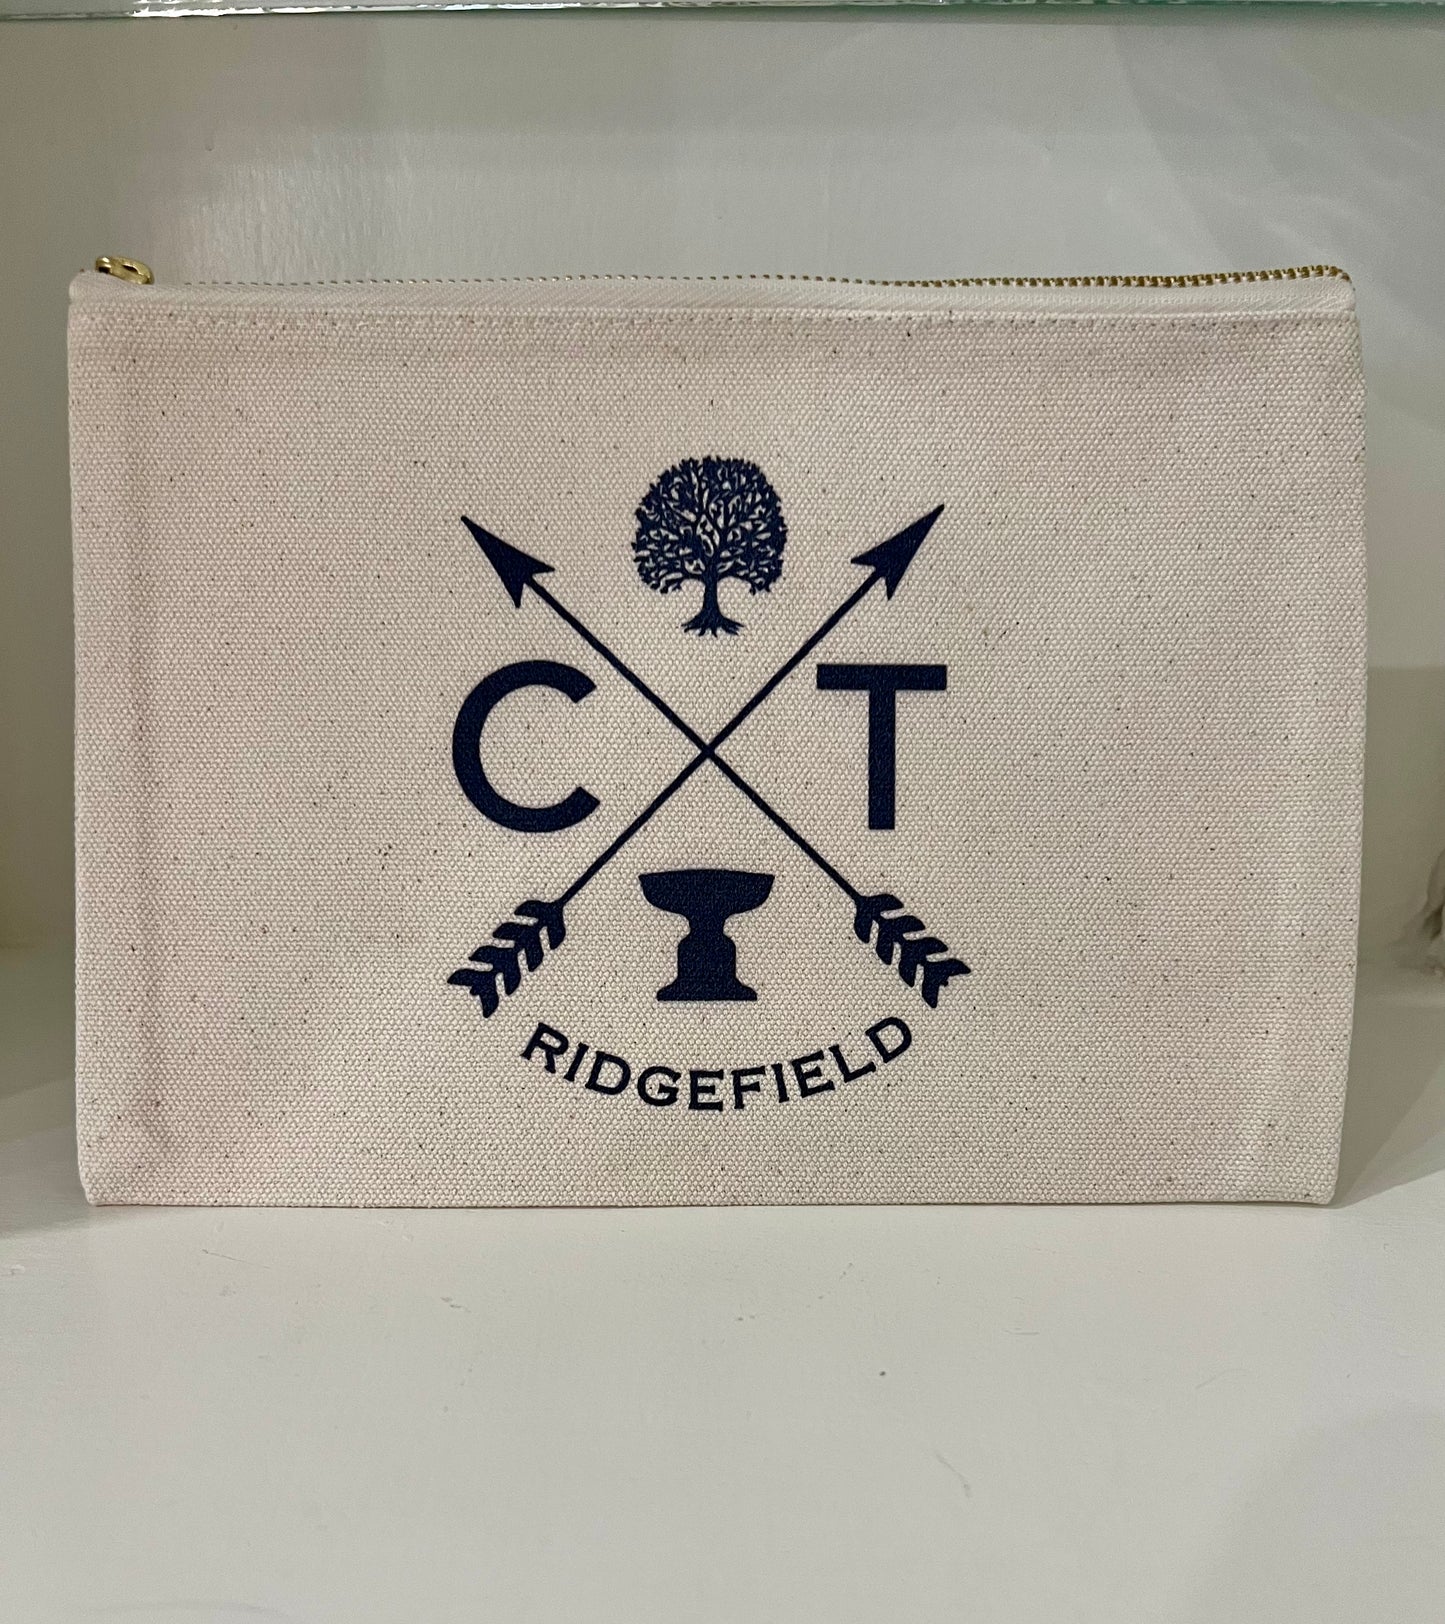 Iconic Ridgefield Cotton Pouch